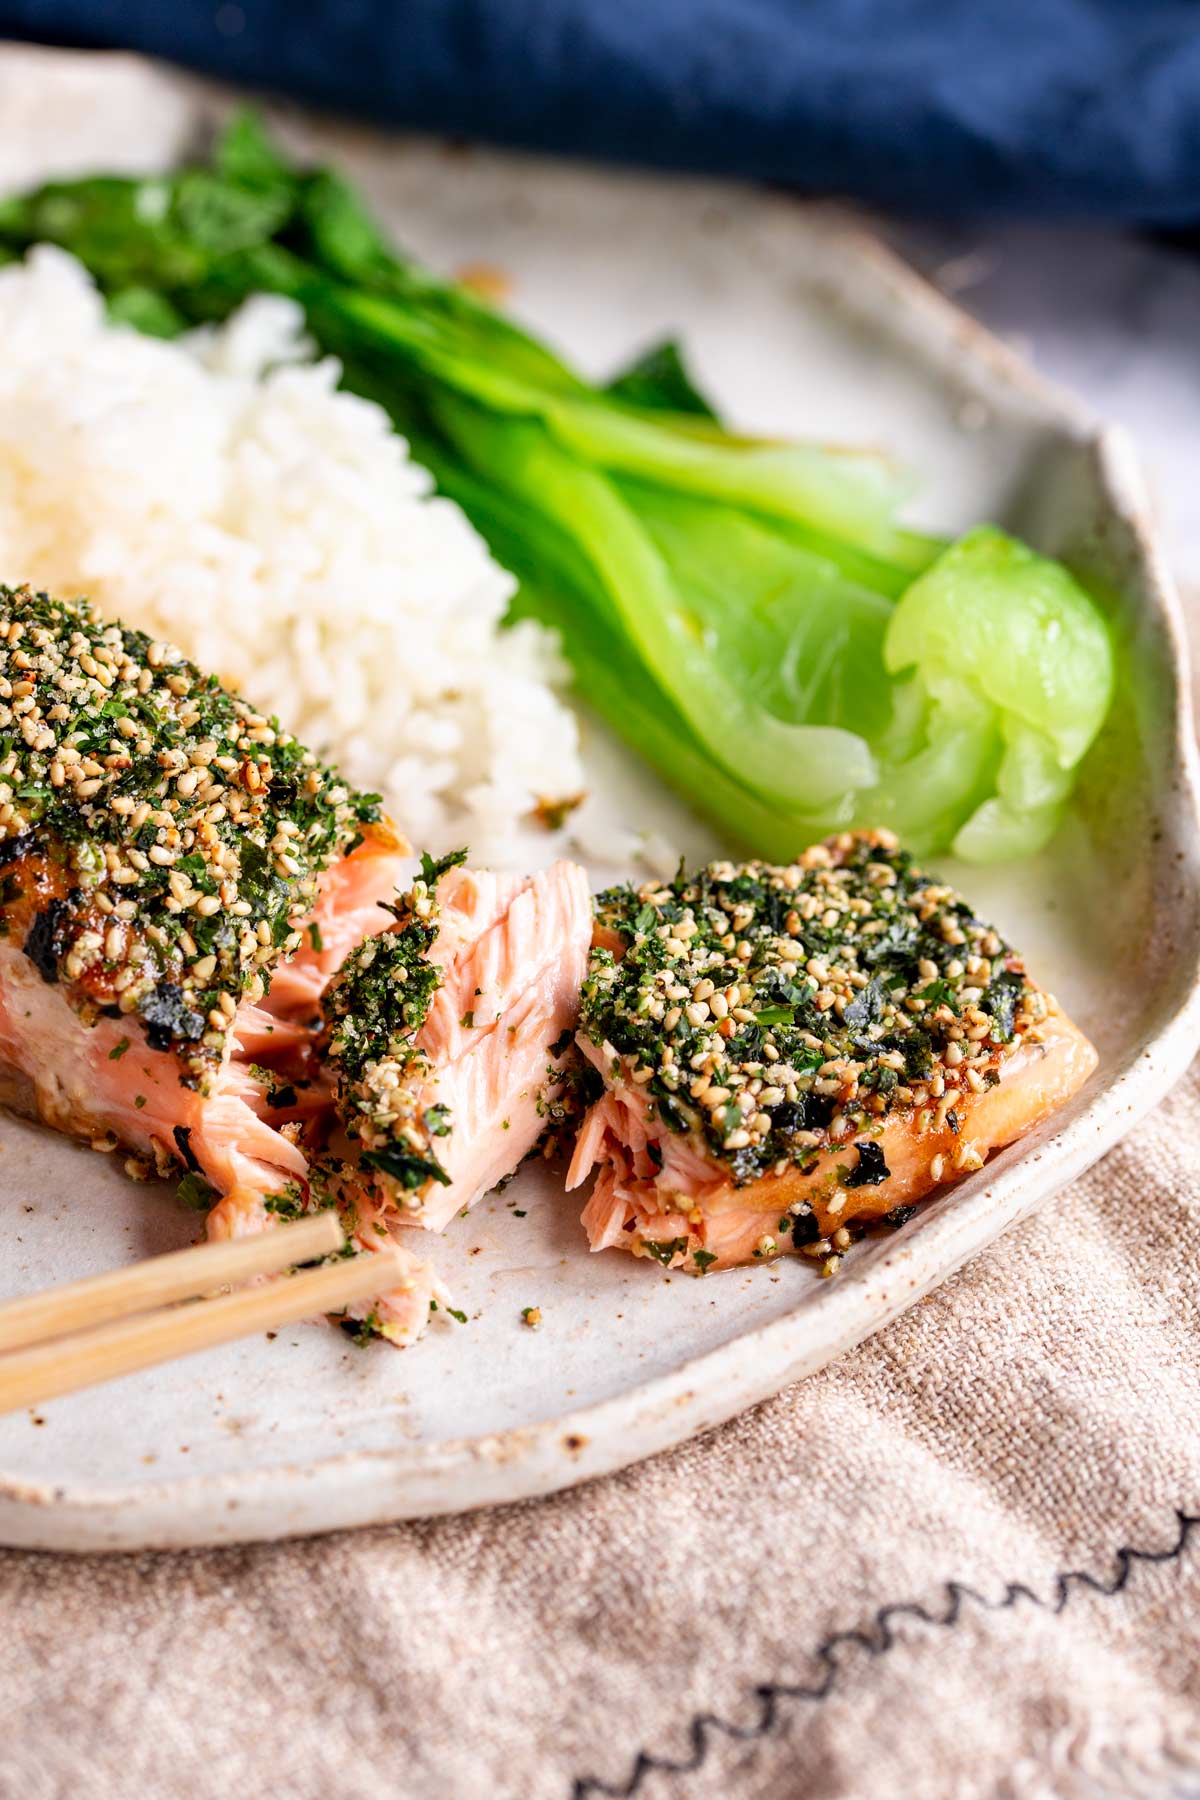 chop sticks breaking off some flakes of salmon from a fillet coated in Furikake